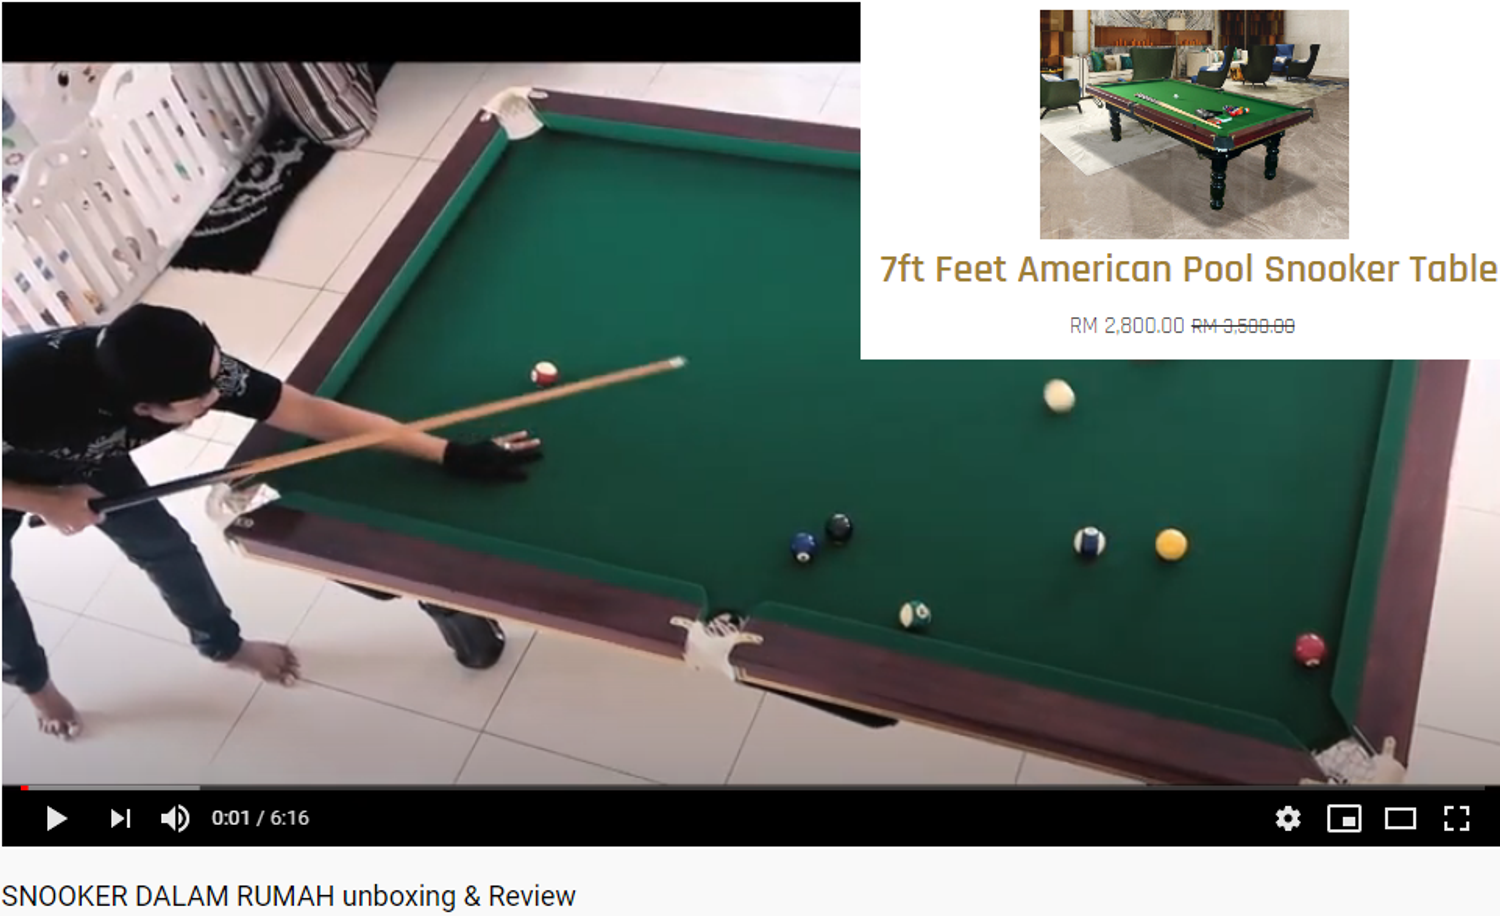 Artanis Pylon - Unboxing Snooker Table from one of our customer